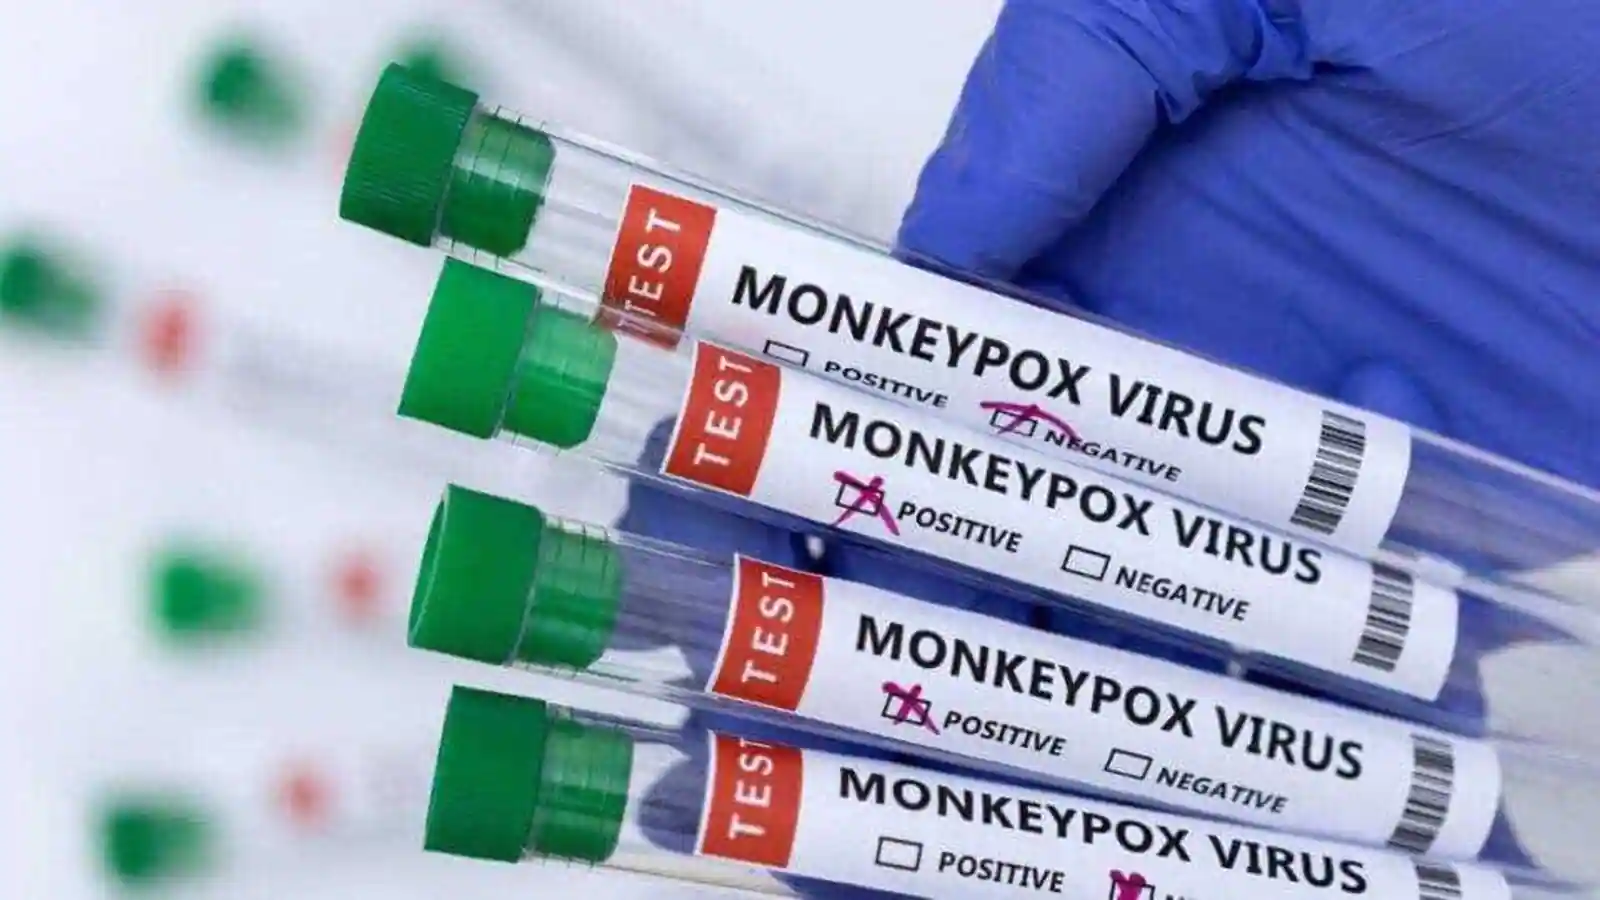 bforblogs Central Government forms task force to closely monitor Monkeypox virus cases in India | Asia’s first death reported in Kerla